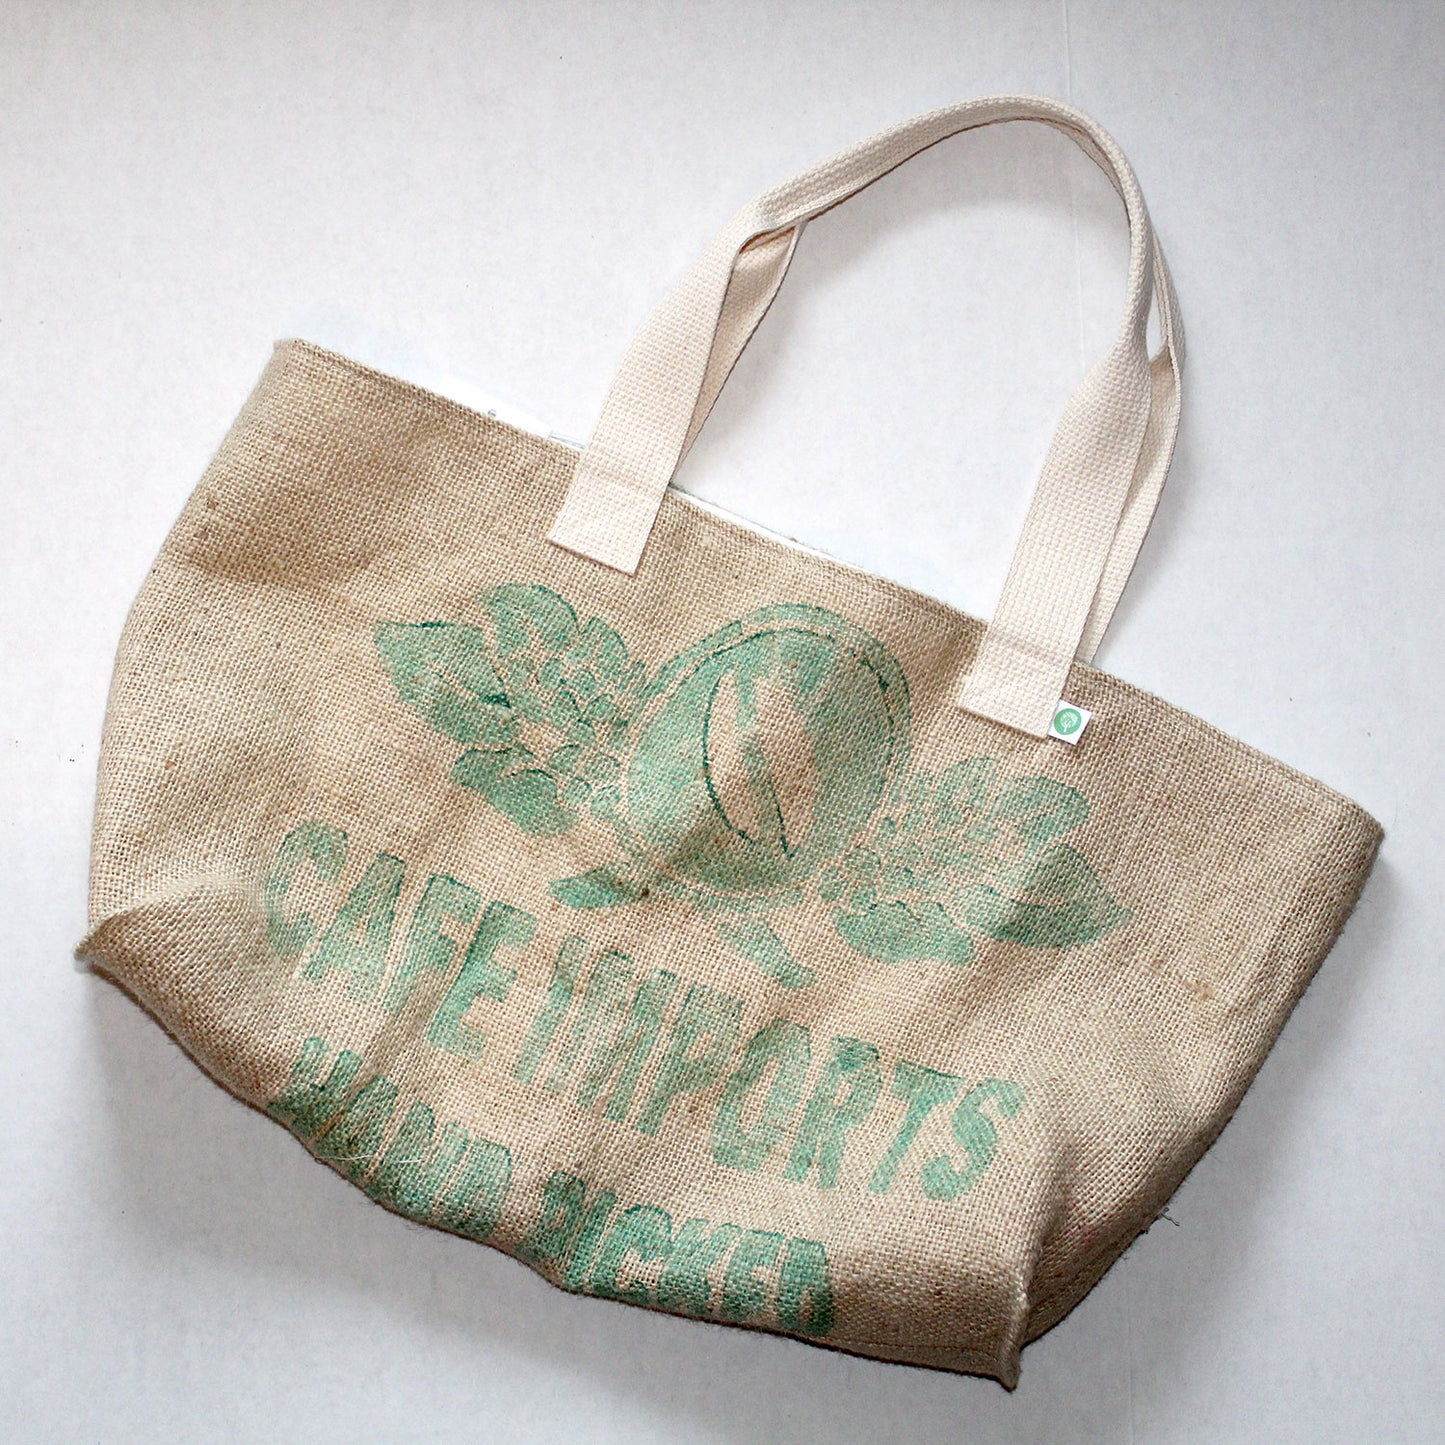 upcycled tote bag - Cafe Imports 2 FRONT